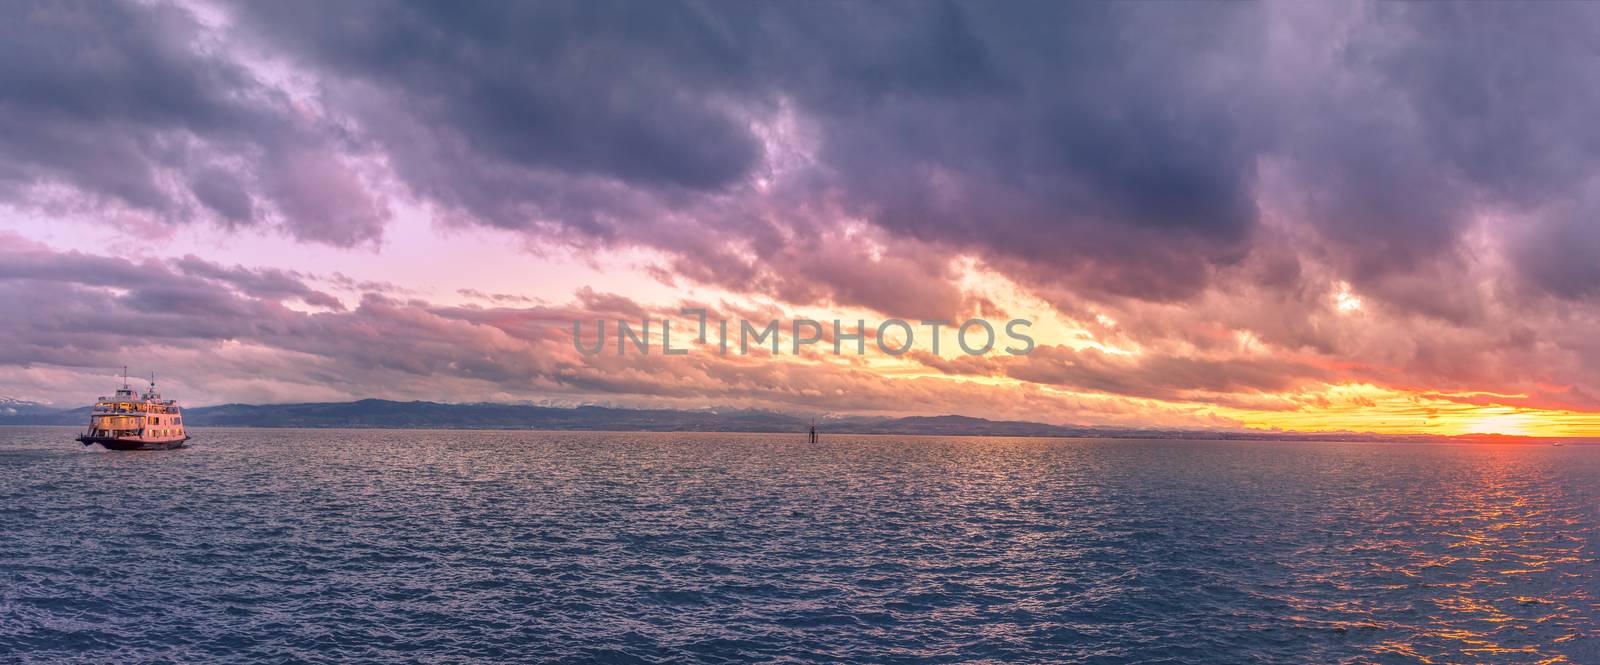 Bodensee lake panorama at sunset by YesPhotographers